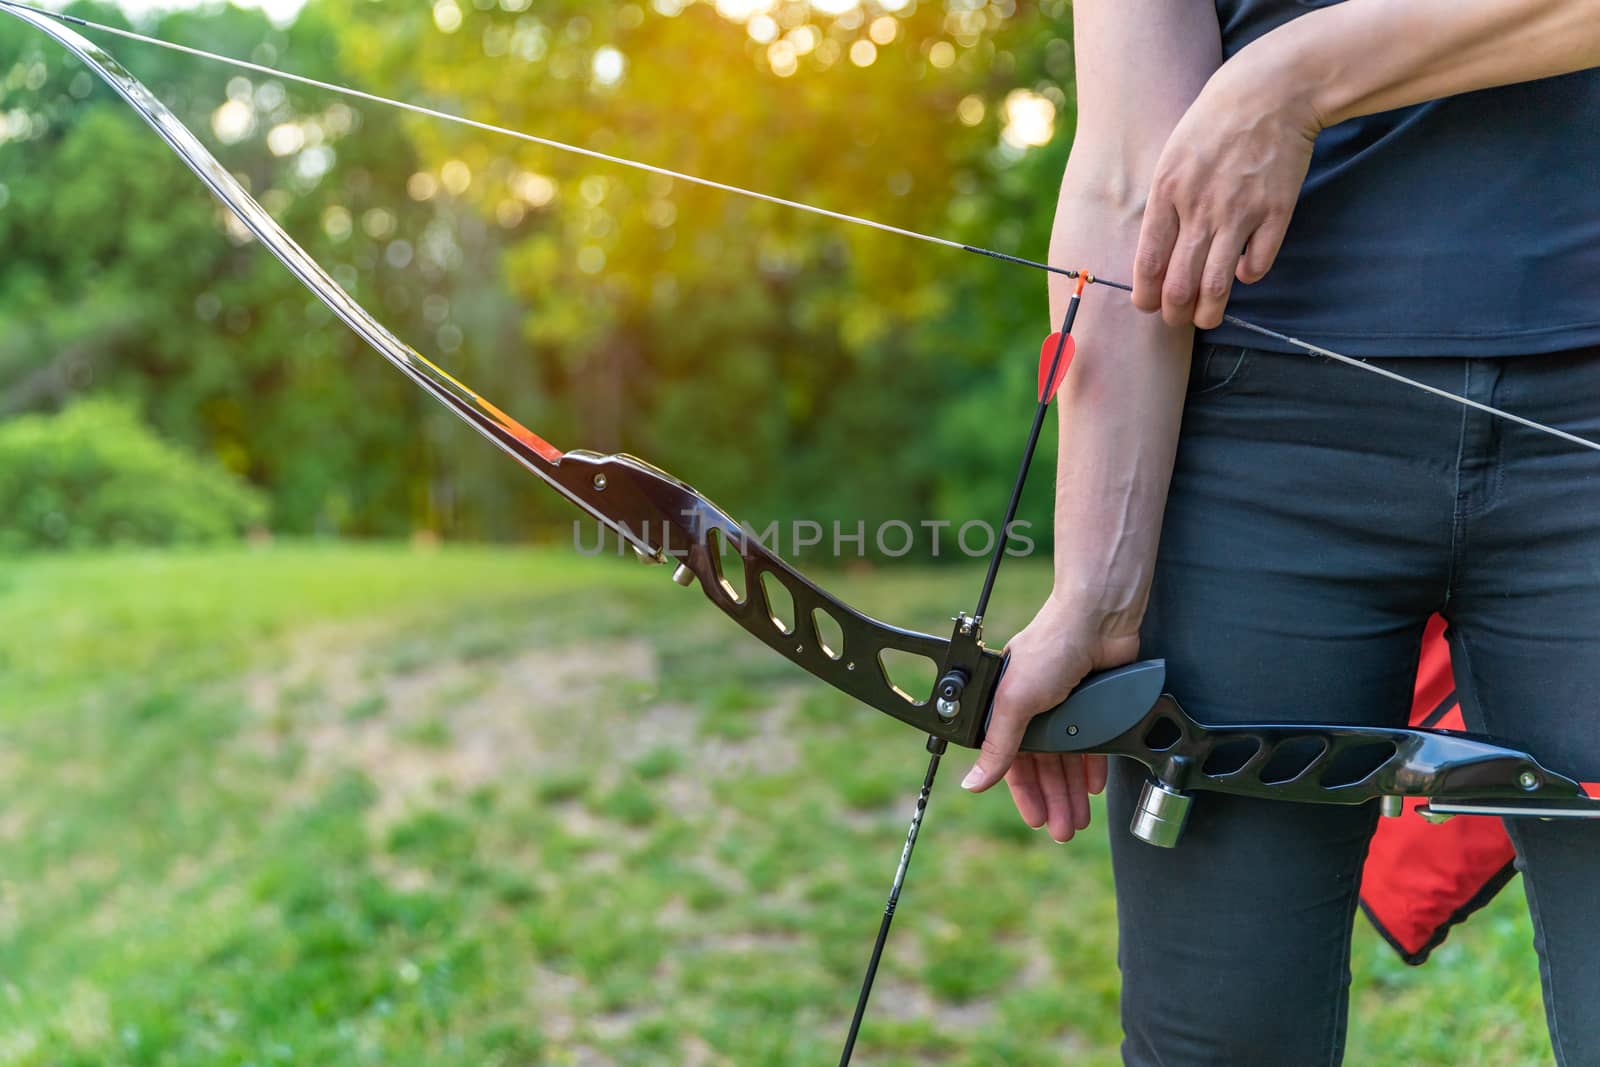 stretching an arrow in a bow during archery in nature.